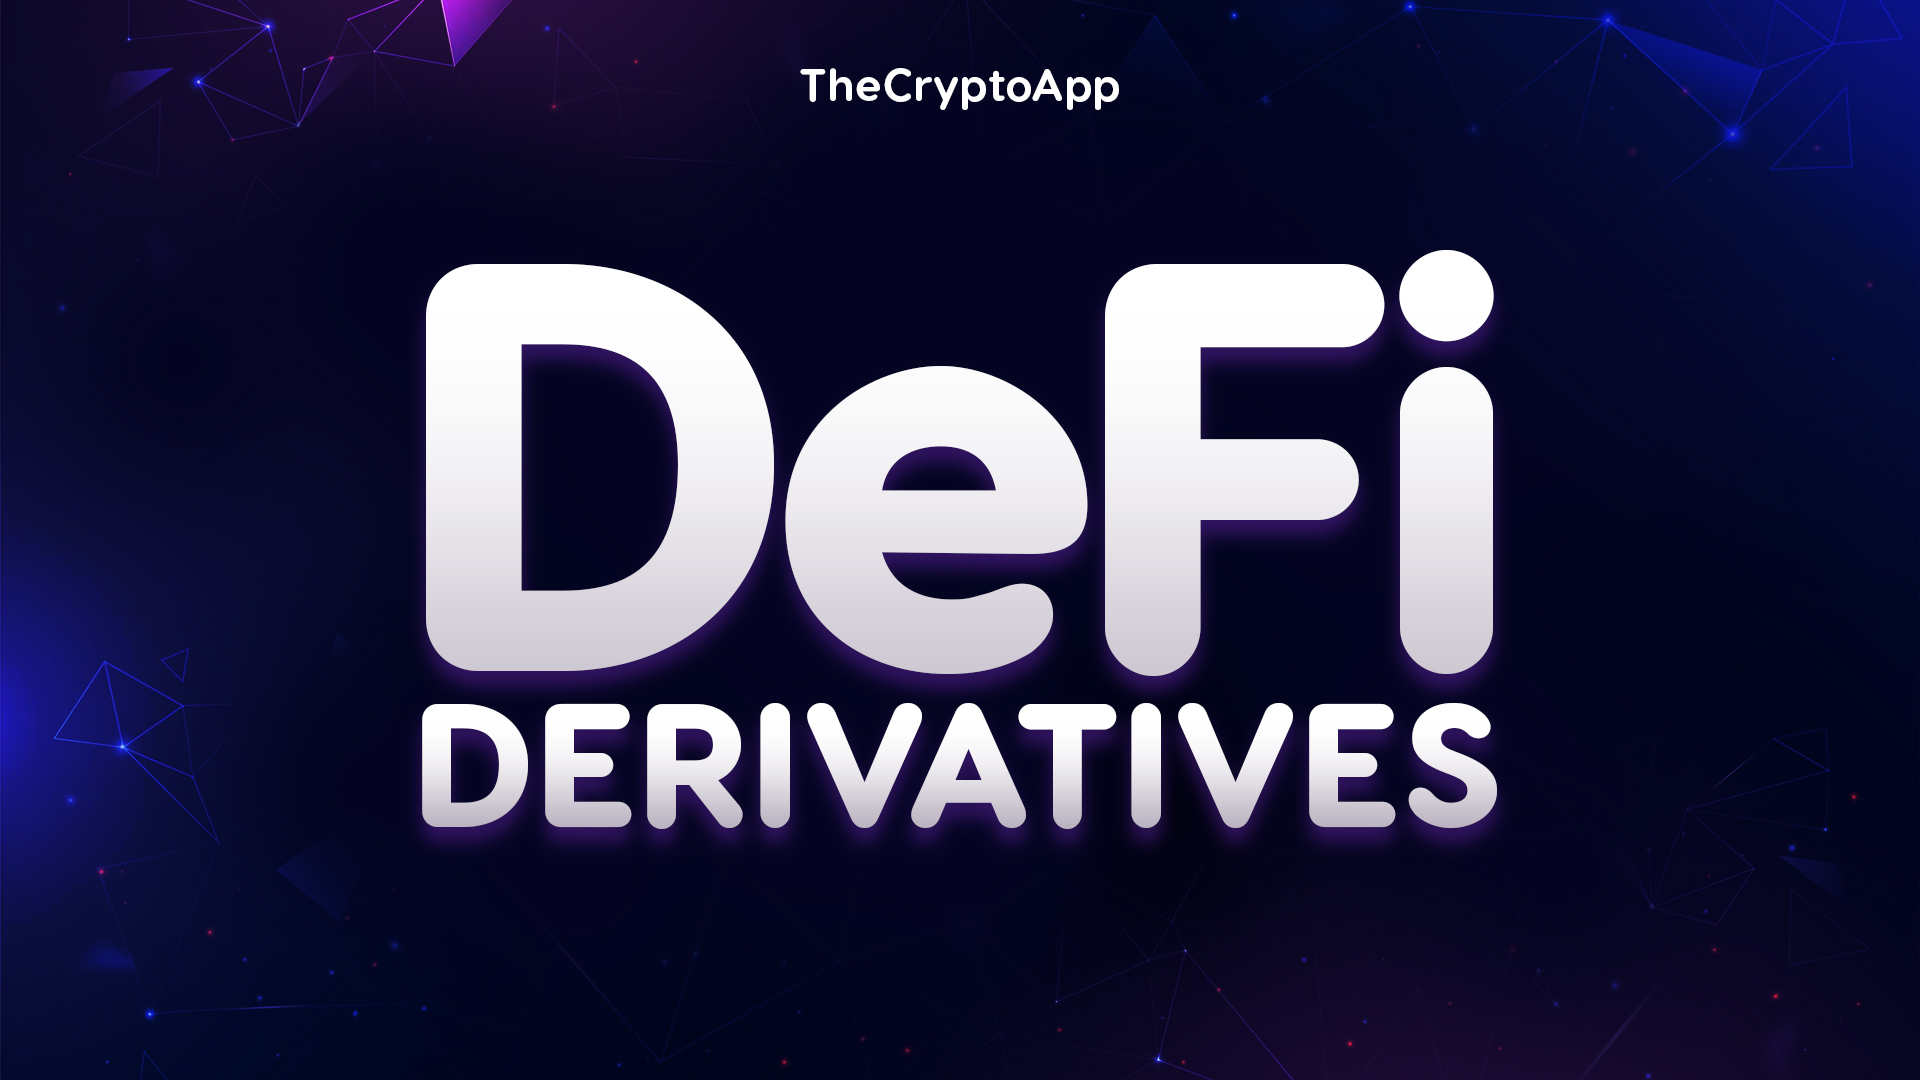 What are DeFi Derivatives?